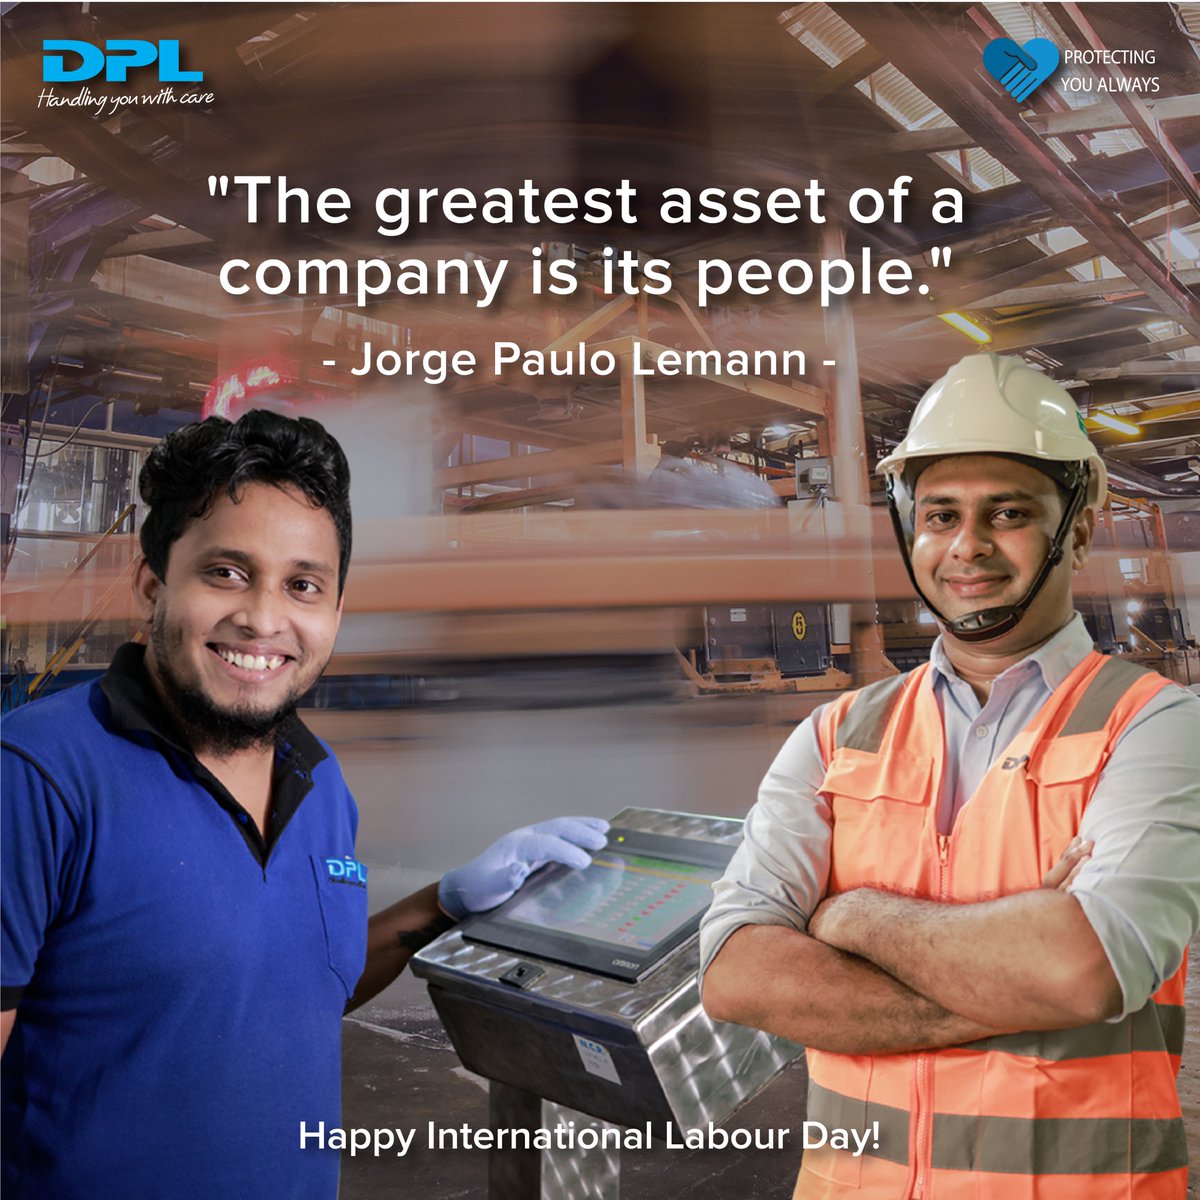 Today, we extend our gratitude to all our employees for their Unwavering commitment and dedication that has helped DPL become the most sought-after #GloveManufacturer in the World. 
Happy Labour Day!

#labourday2023 #labourday #ourpeopleourstrength #DPL #ProtectingYouAlways